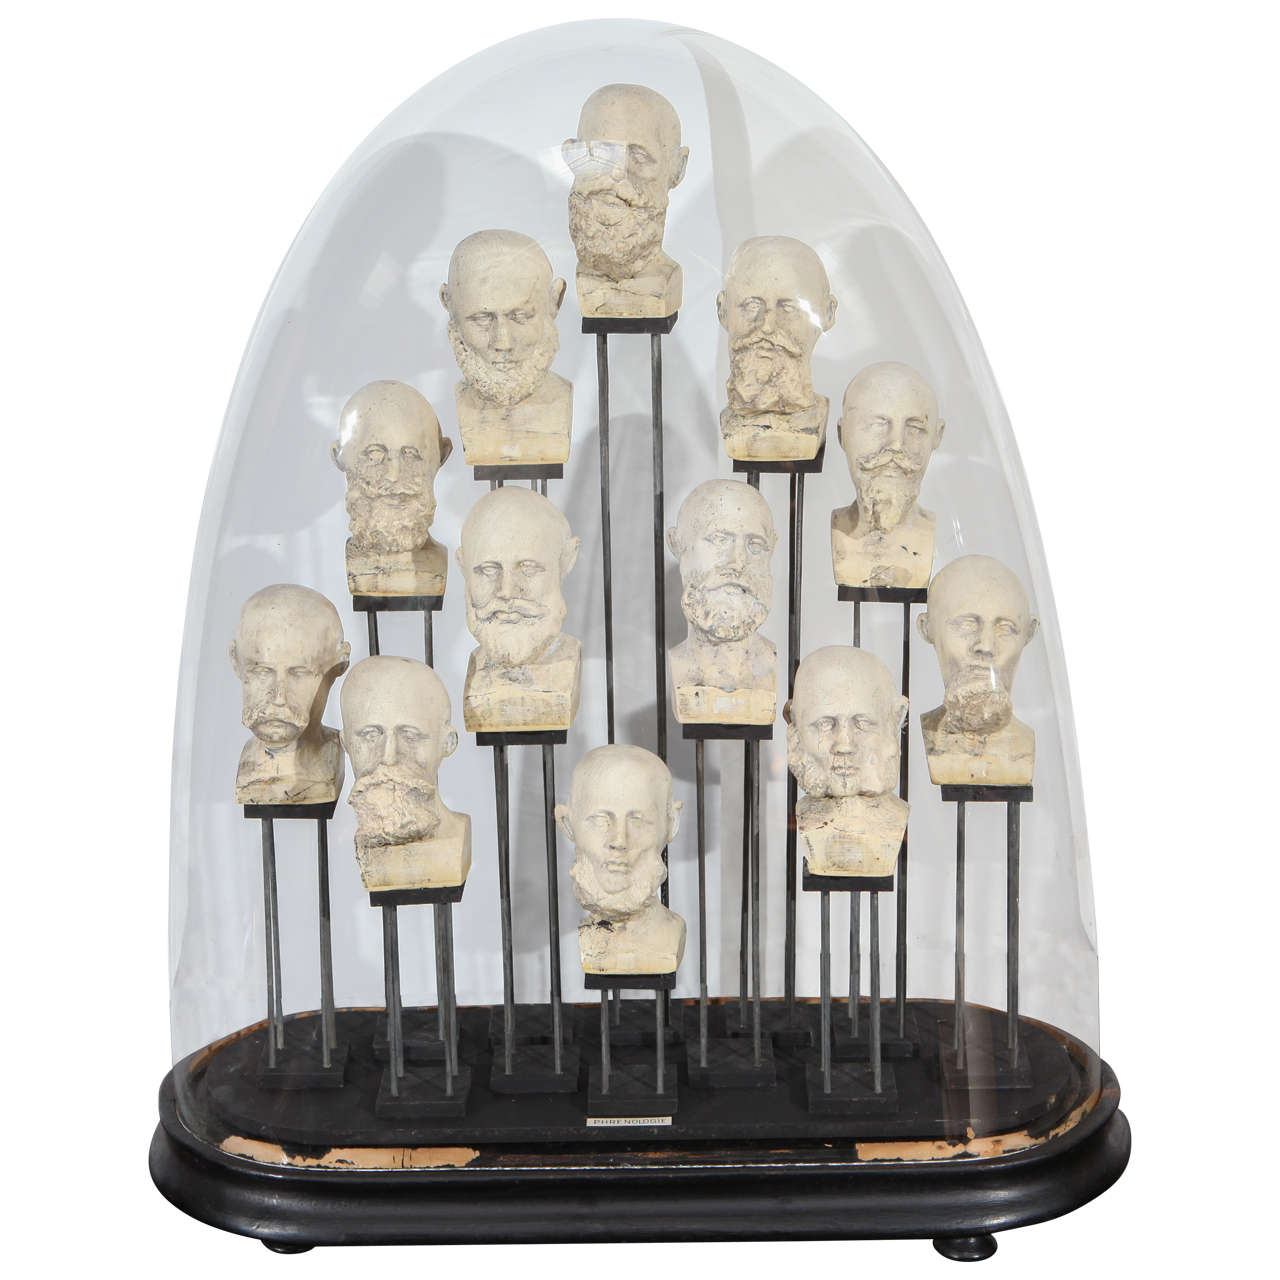 Collection of Phrenology in Oval Dome